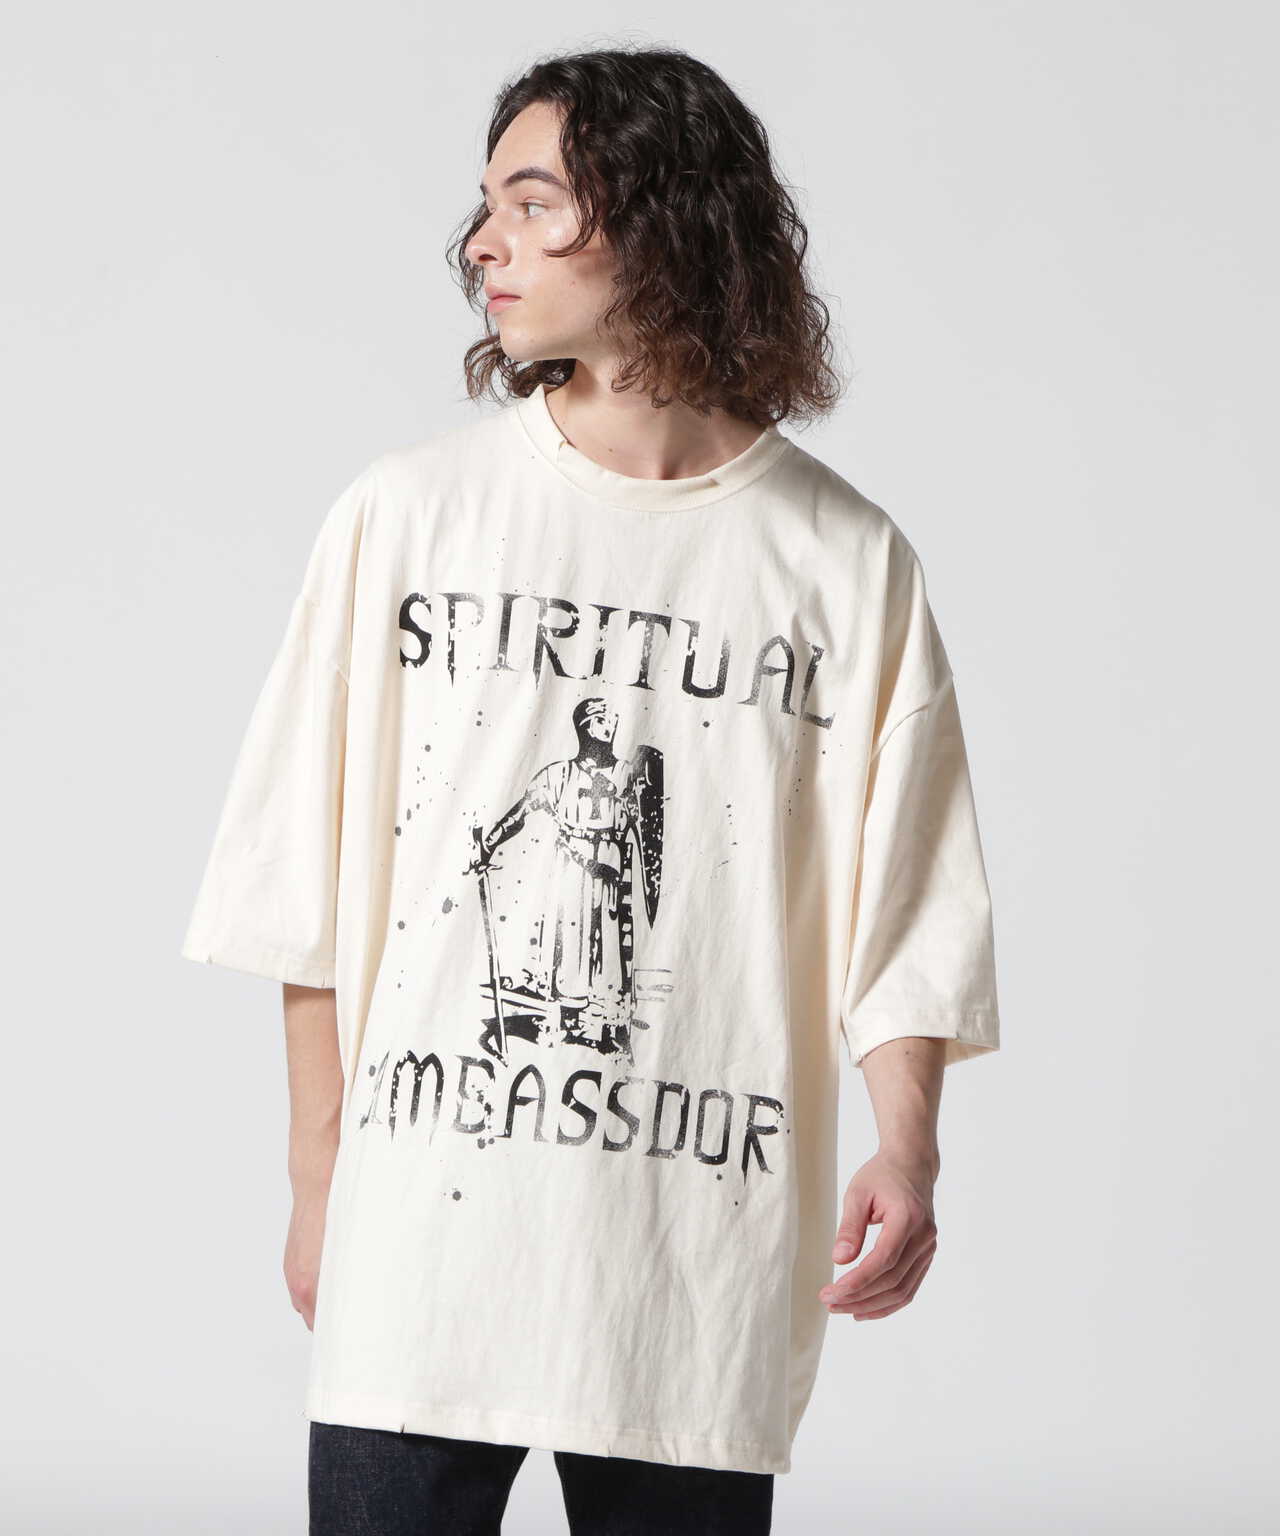 SOMEIT/サミット/S.A.S VINTAGE TEE/ヴィンテージTシャツ | LHP